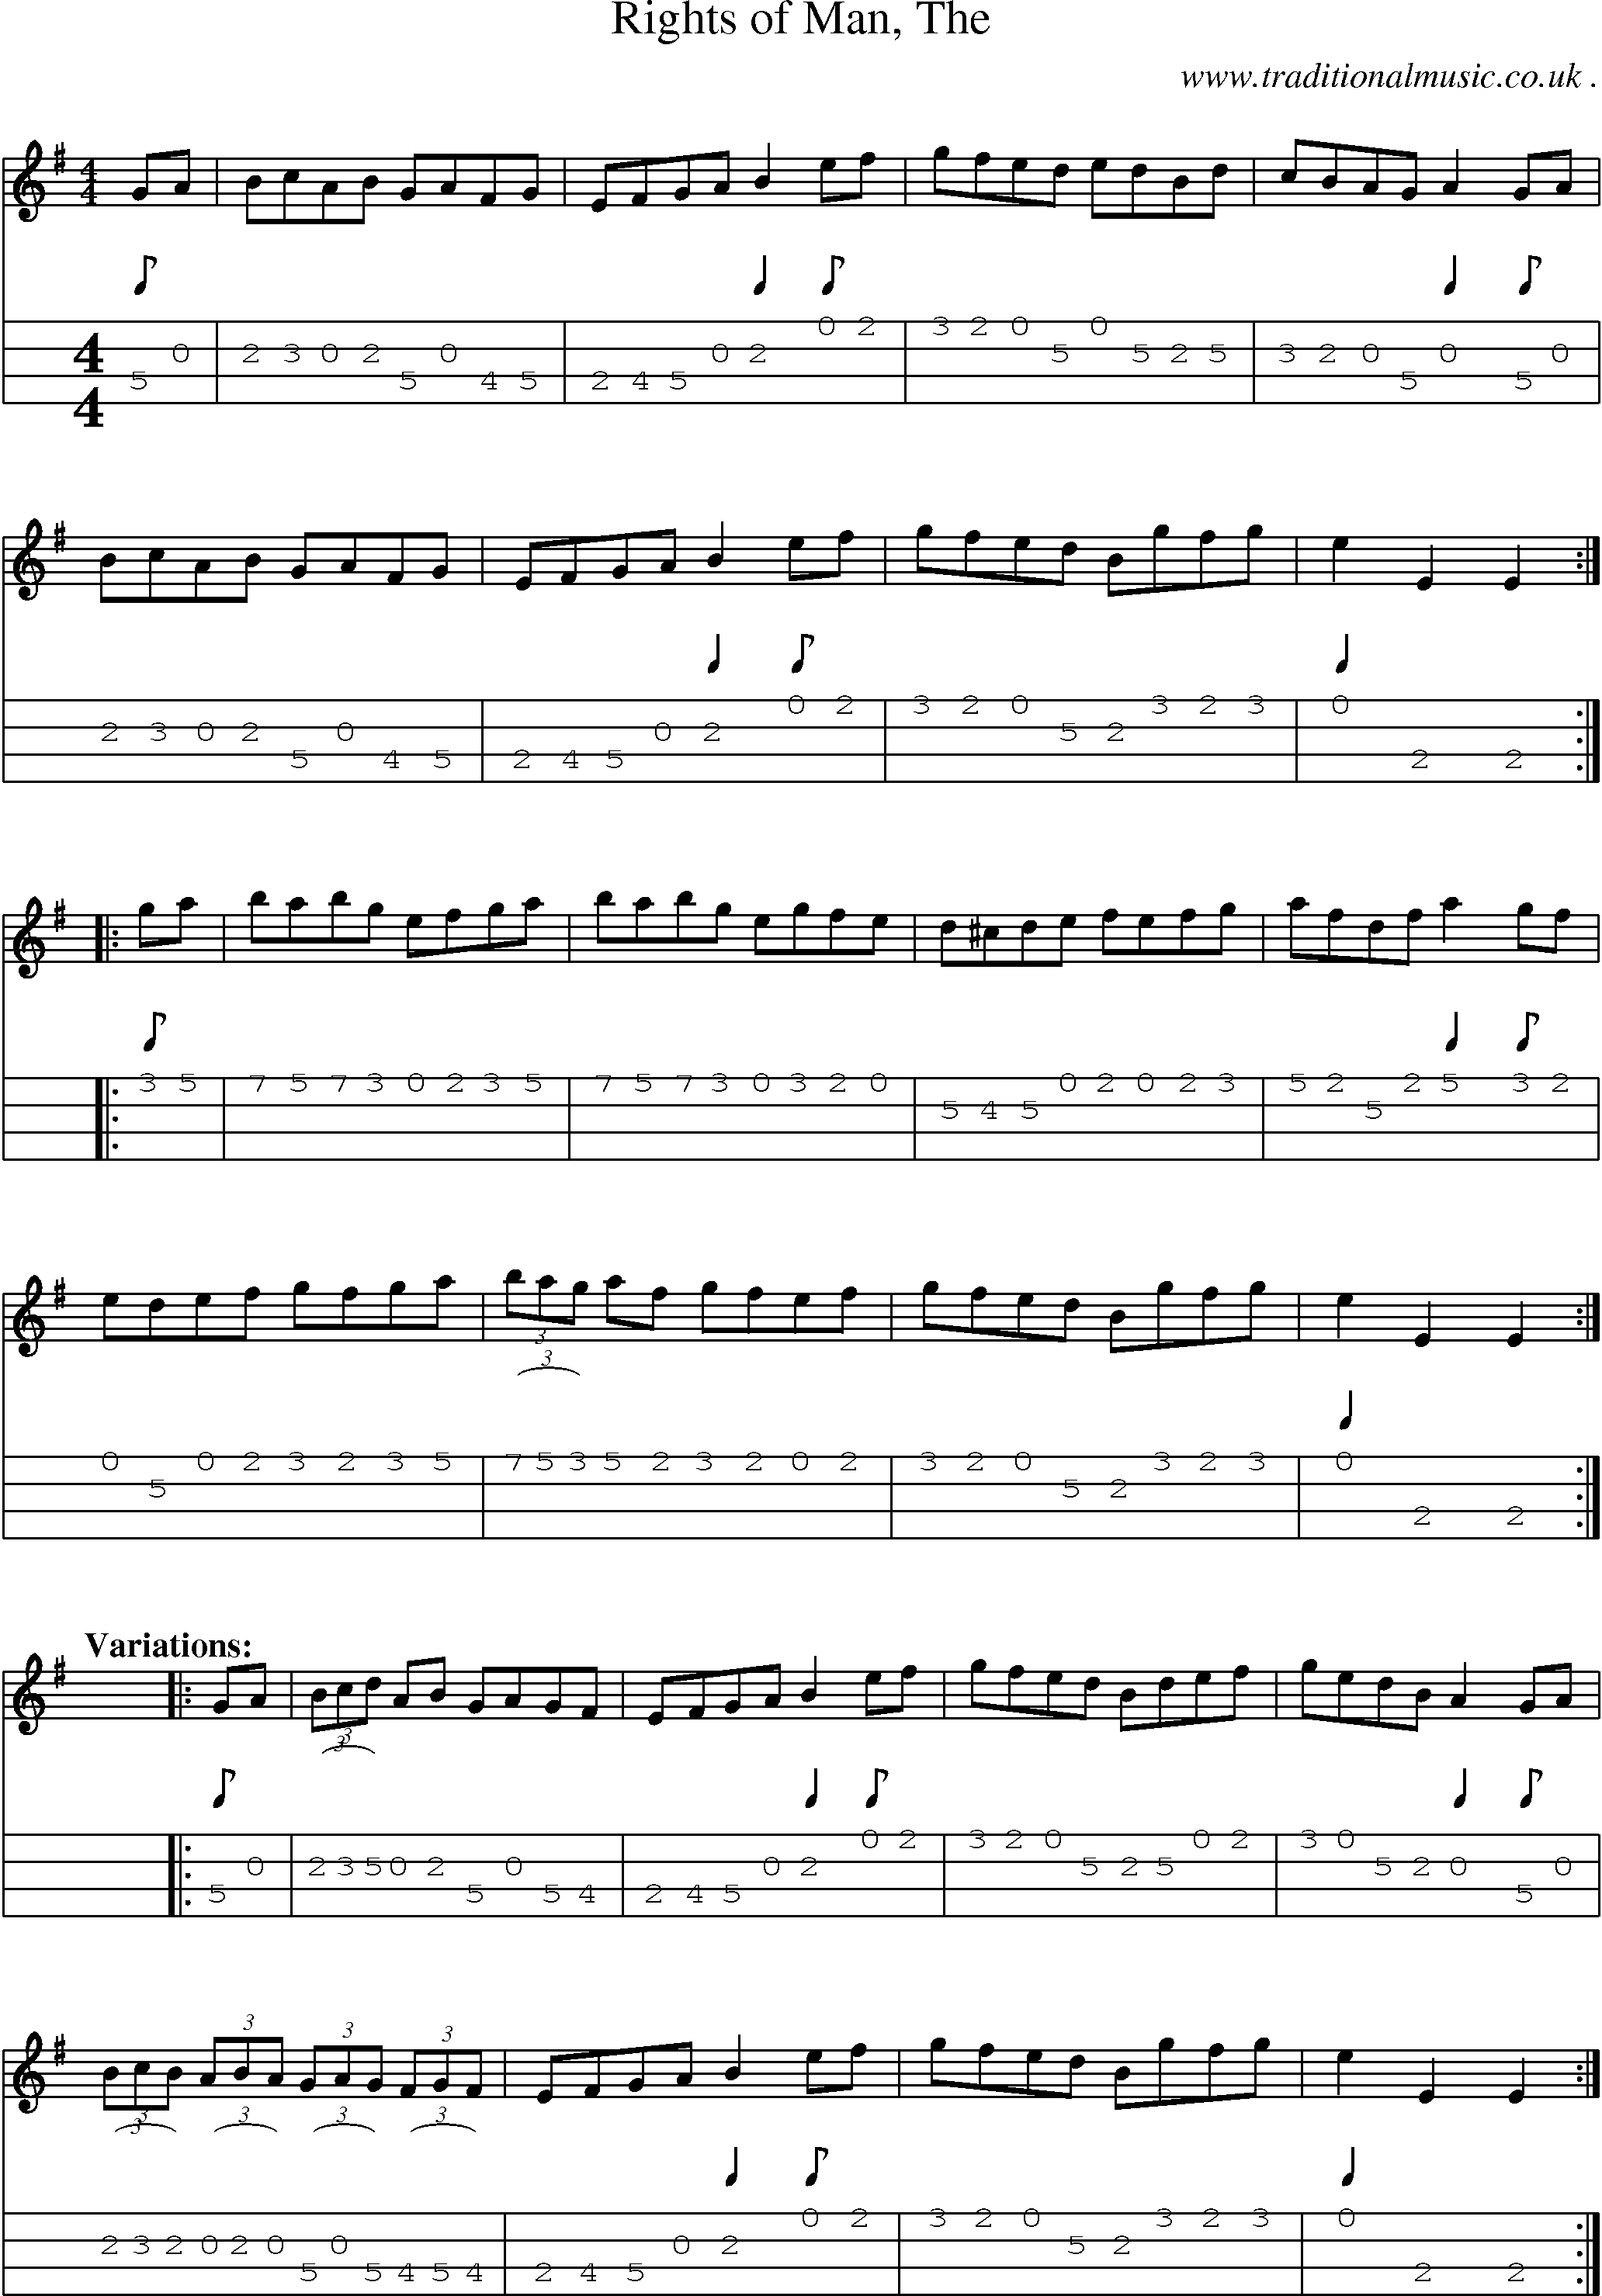 Music Score and Guitar Tabs for Rights Of Man The